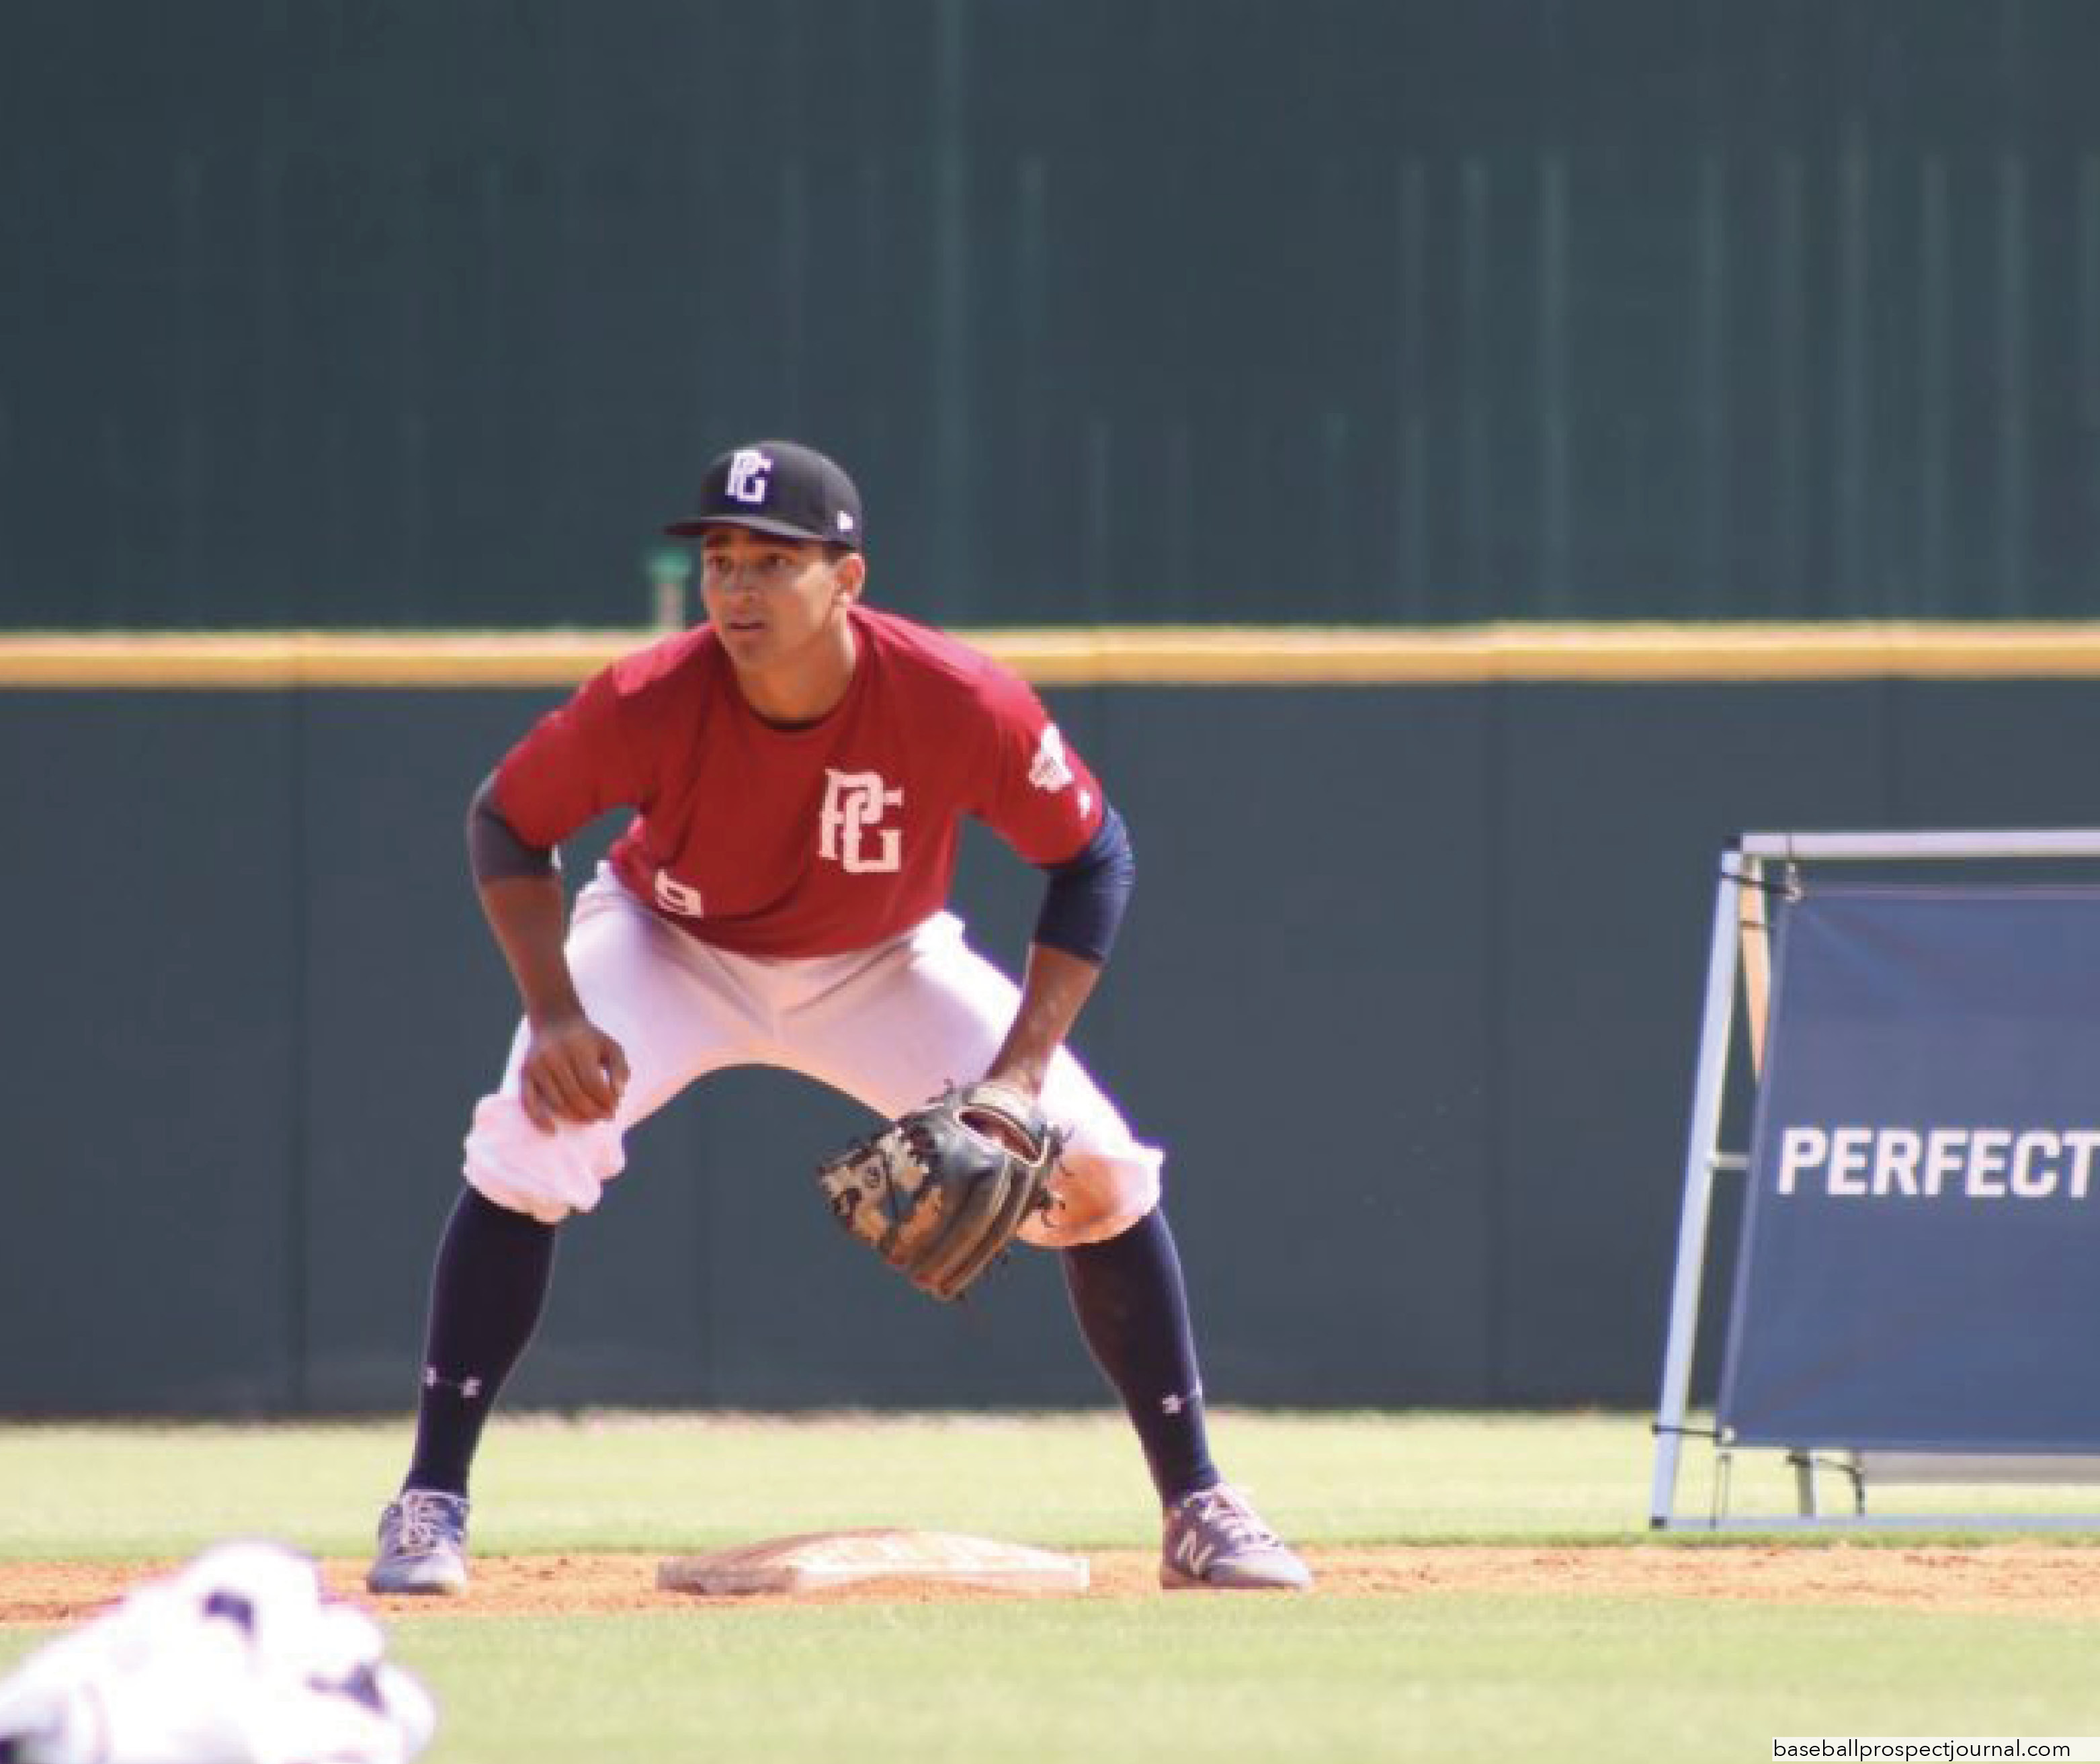 Best 2021 Baseball Players According to Perfect Game - ITG Next